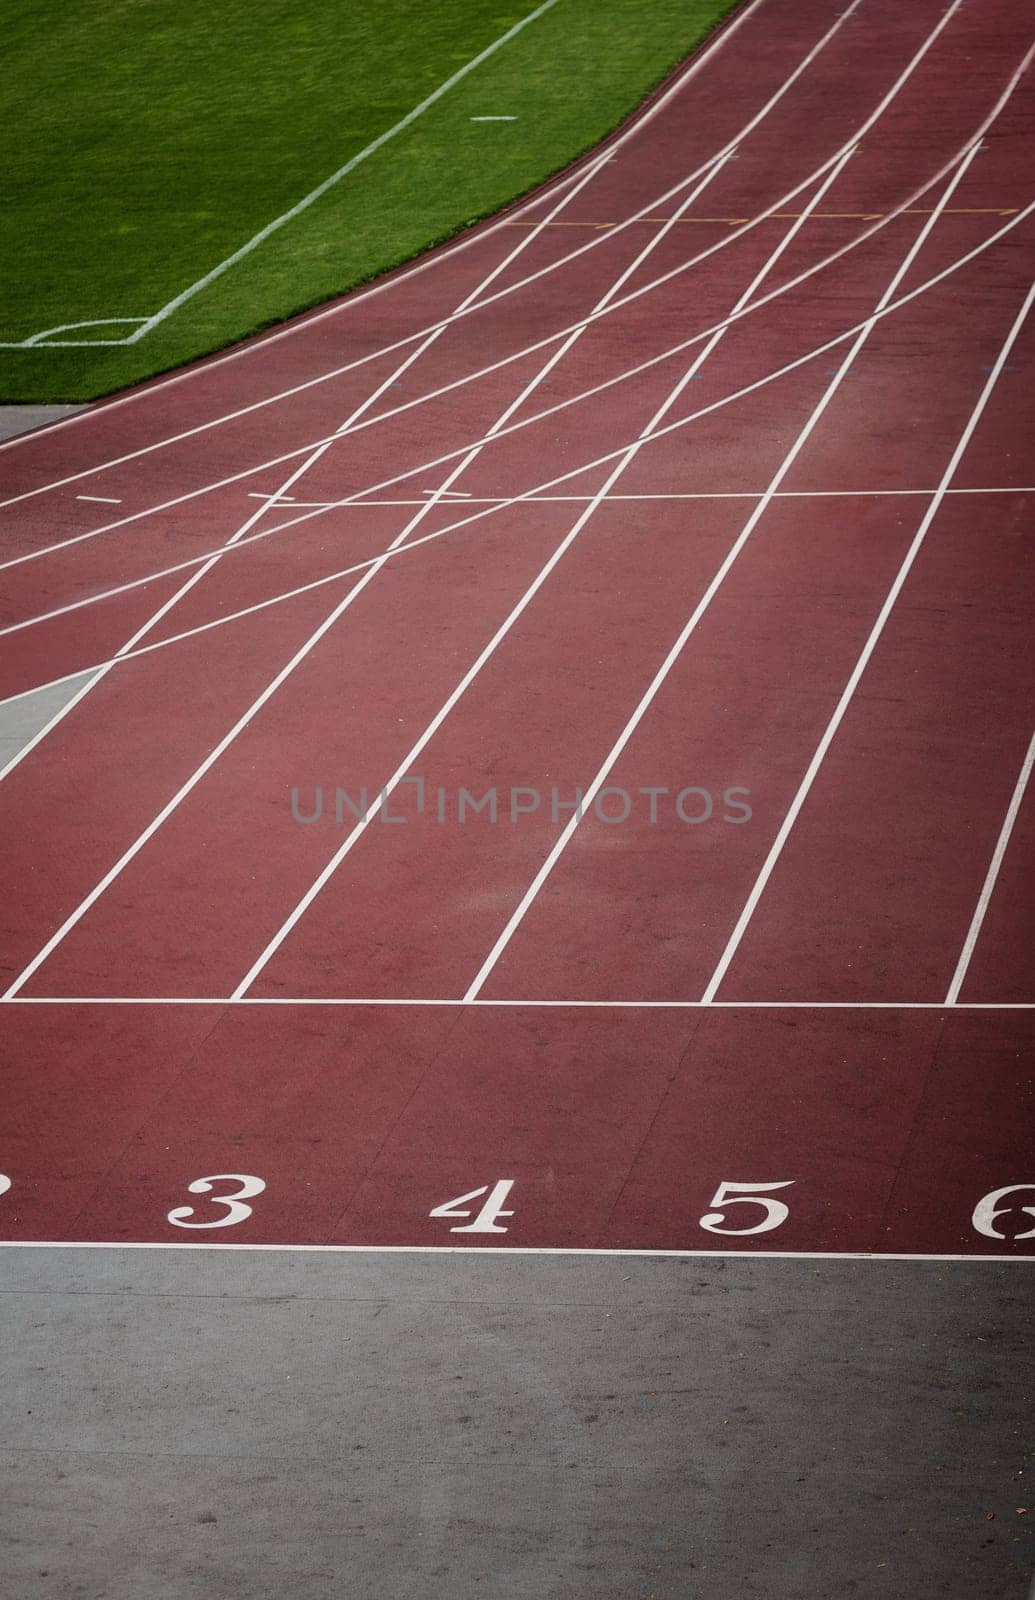 Starting grid of race track at the stadium. Athlete track